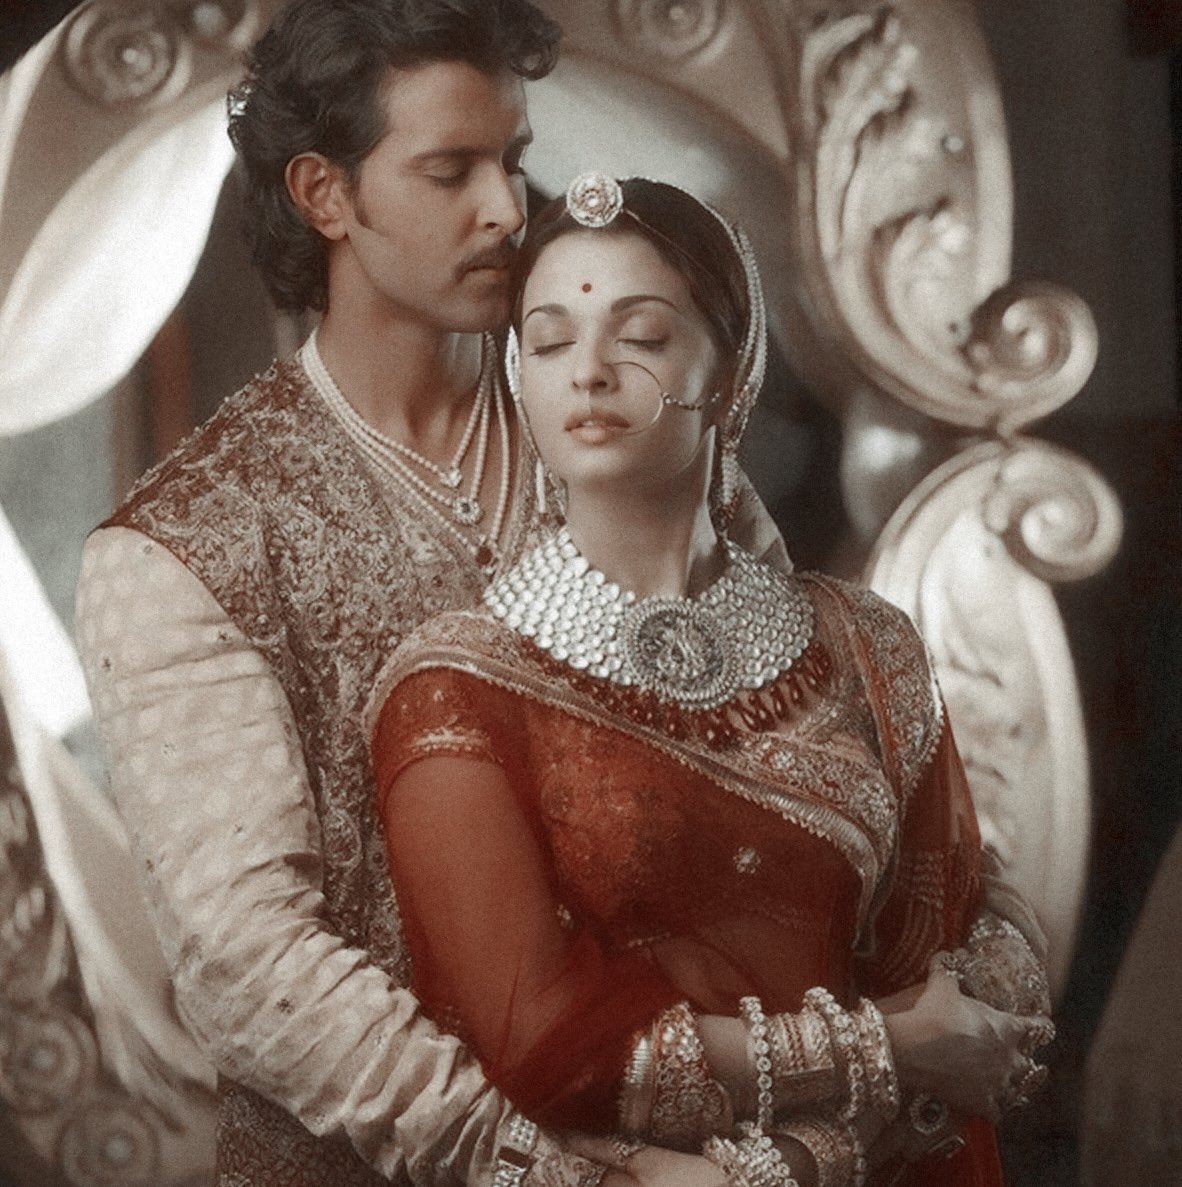 —jodhaa akbar the no. of times i hv seen this movie is insane ughh the beauty nd the excellence od hrithik-aish duo plus aish’s look in the movie <3